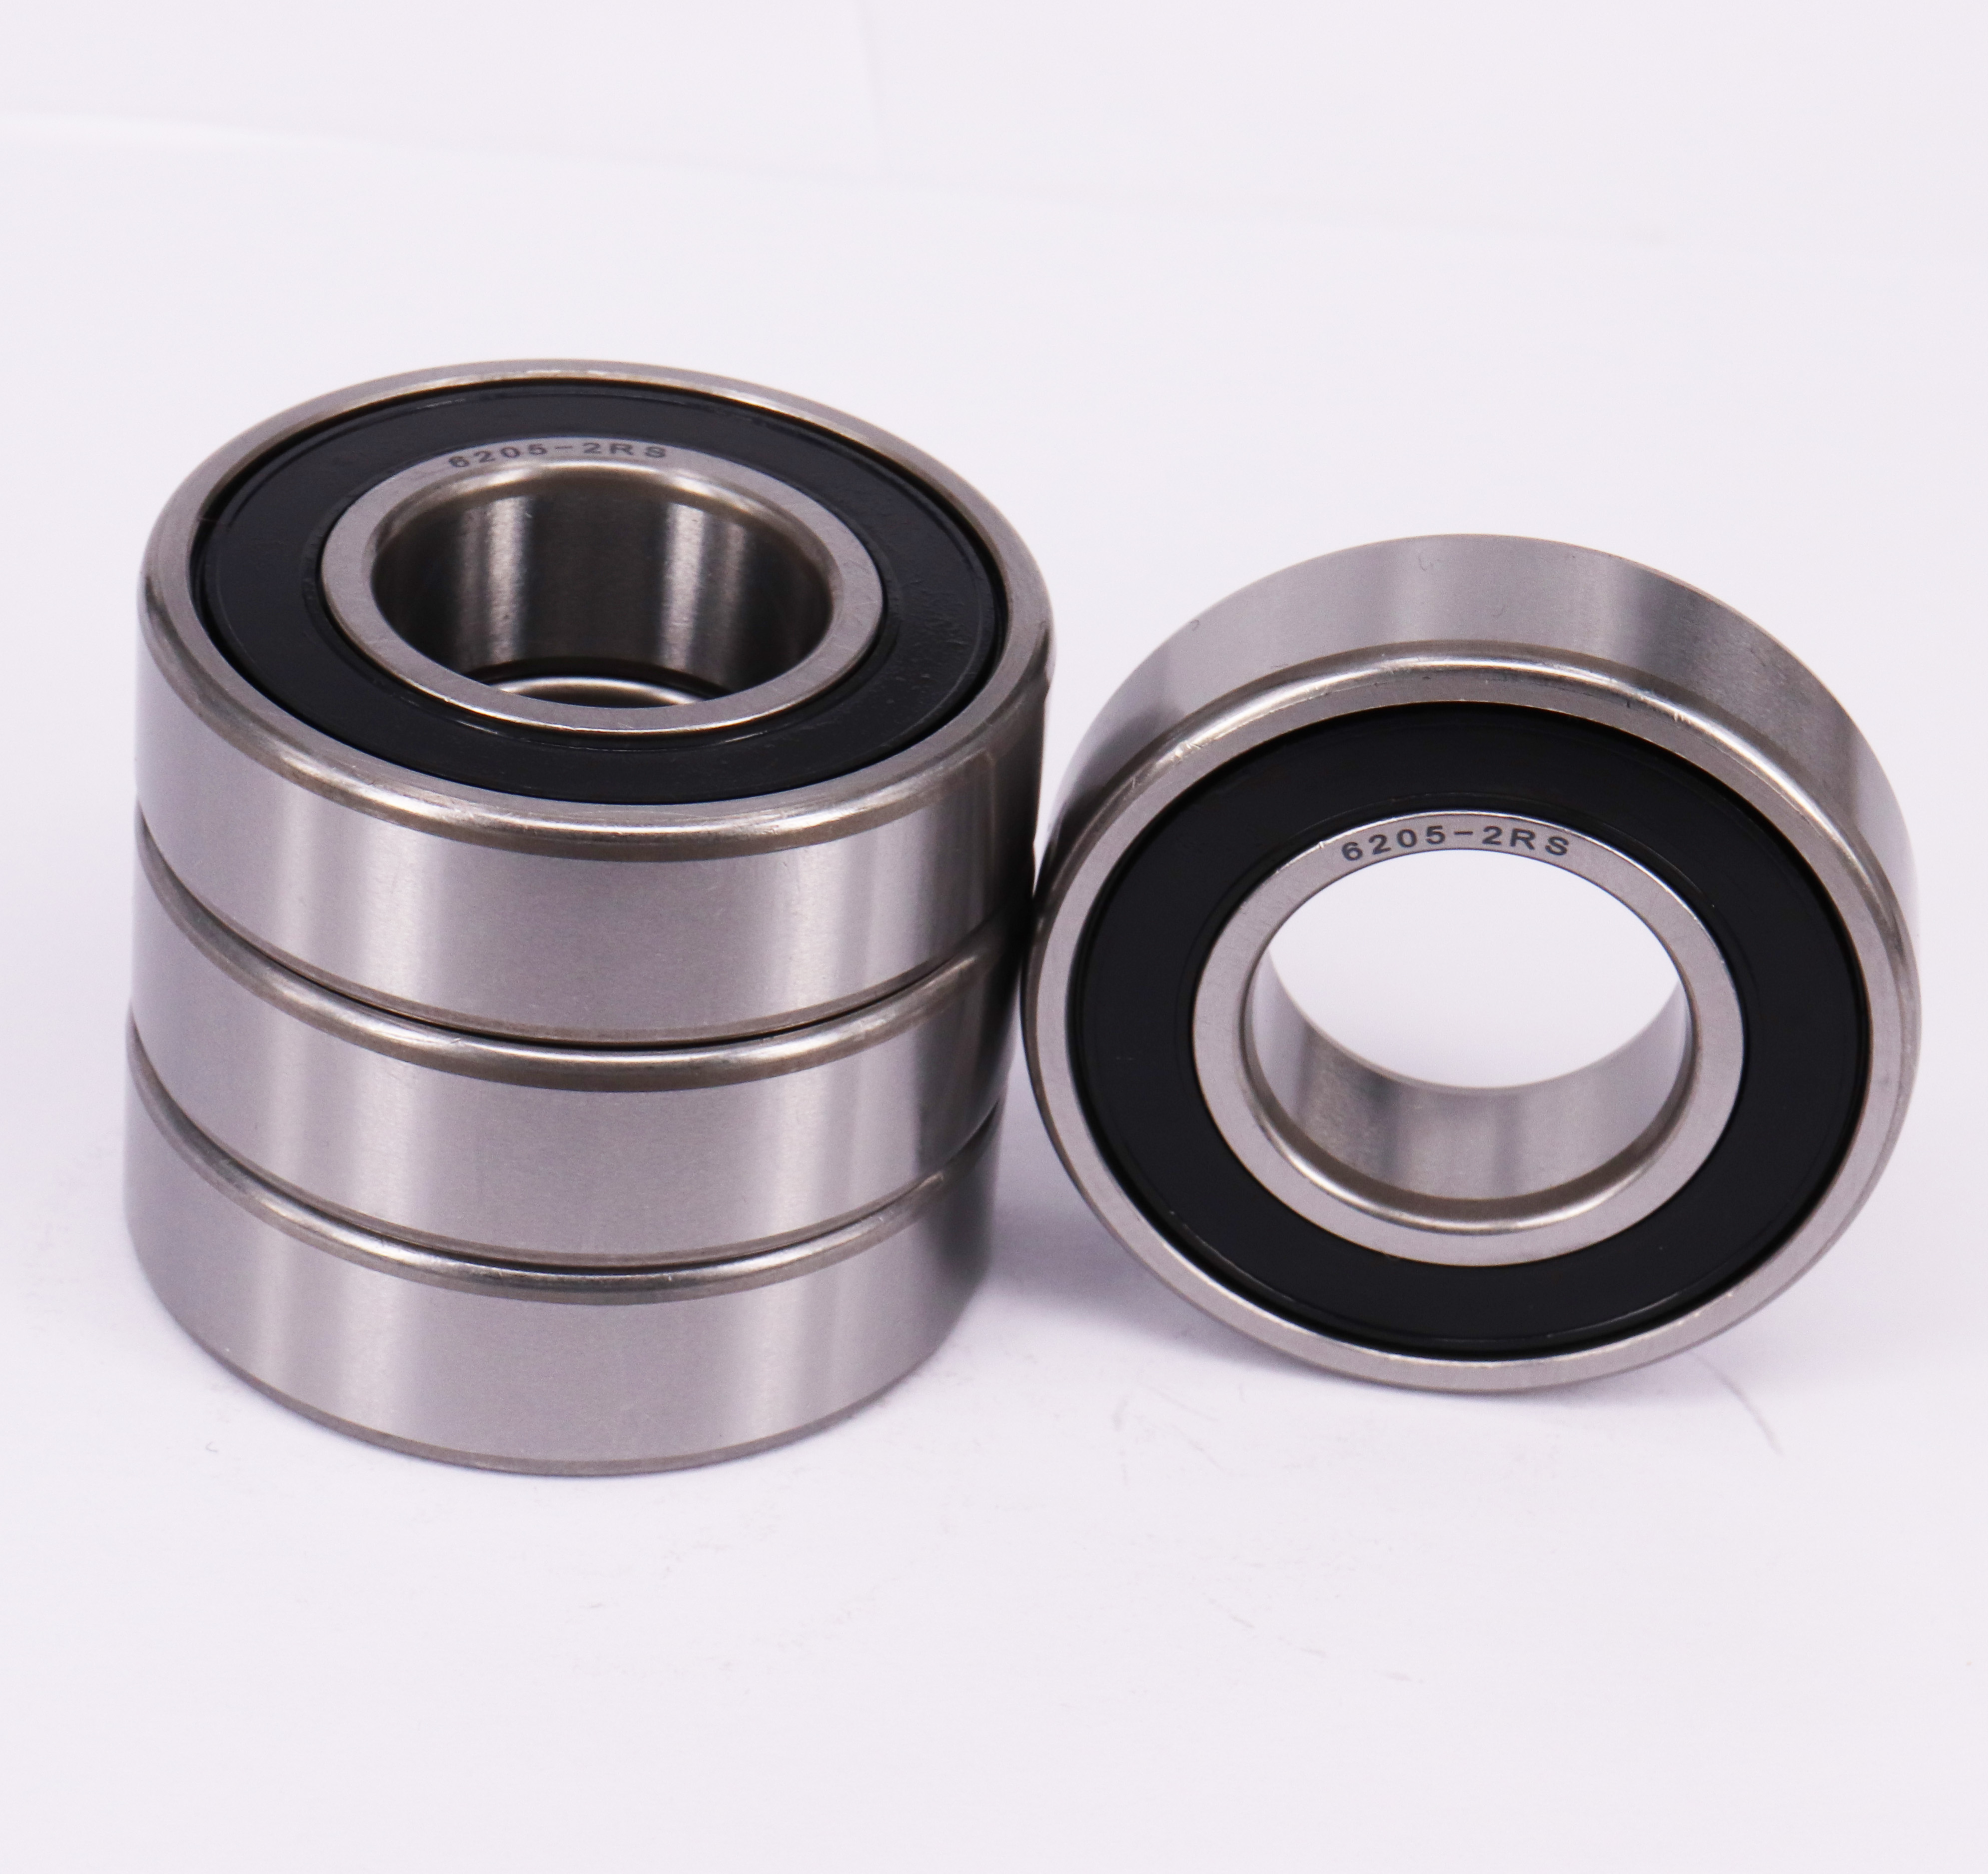 NSK Technology Gcr15 Deep Groove Bearings 6205 ZZ 2RS Ball Bearings For Electrical Machinery